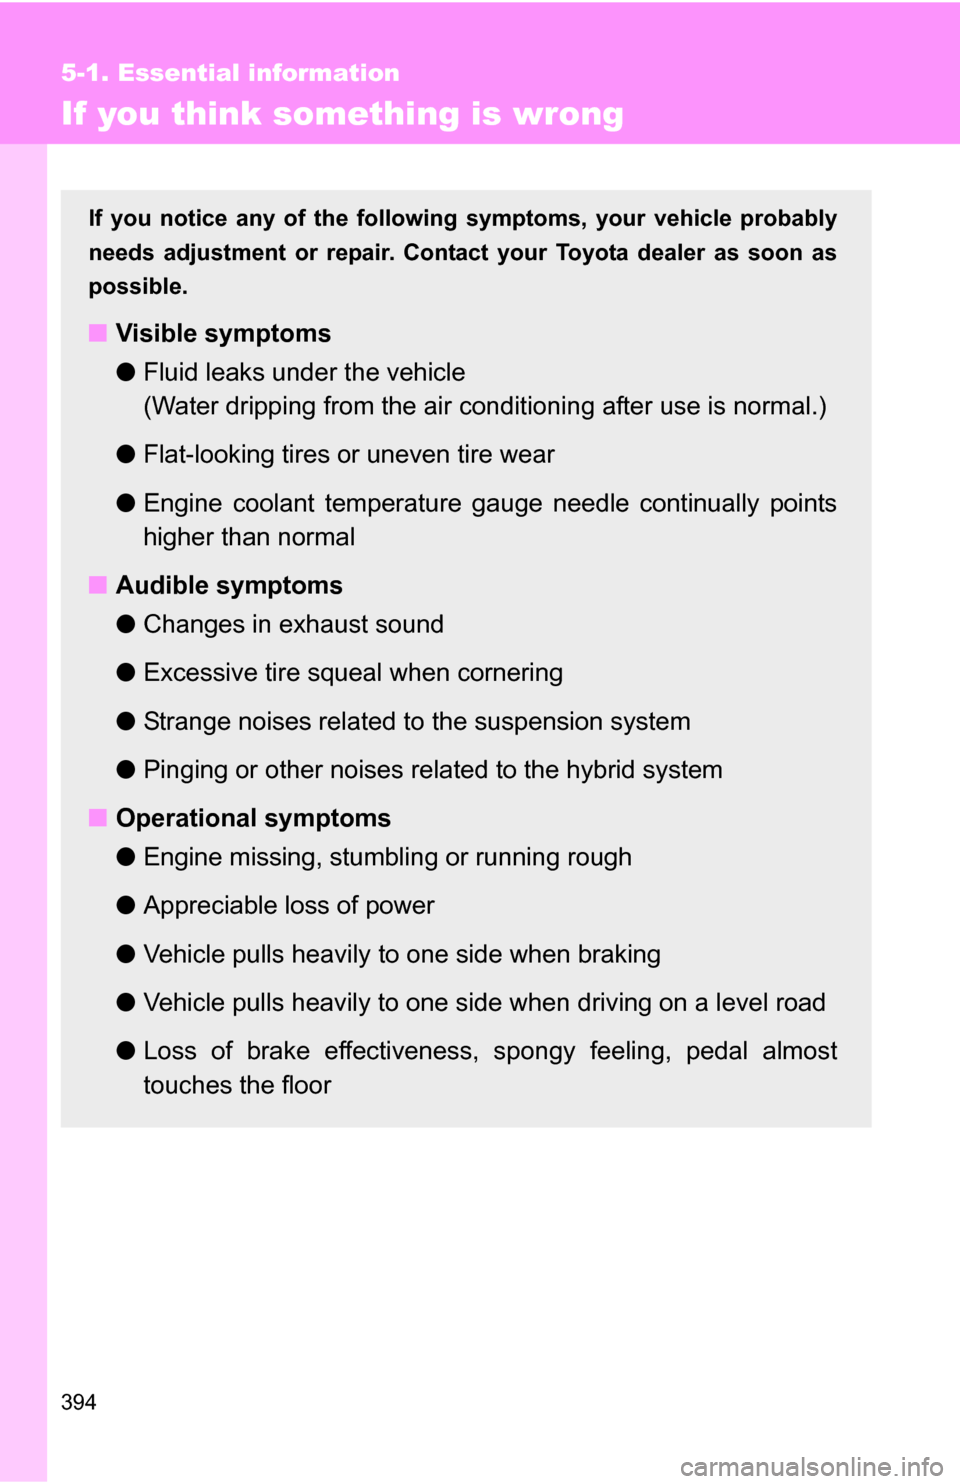 TOYOTA CAMRY HYBRID 2010 XV40 / 8.G Owners Manual 394
5-1. Essential information
If you think something is wrong
If you notice any of the following symptoms, your vehicle probably
needs adjustment or repair. Contact your Toyota dealer as soon as
poss